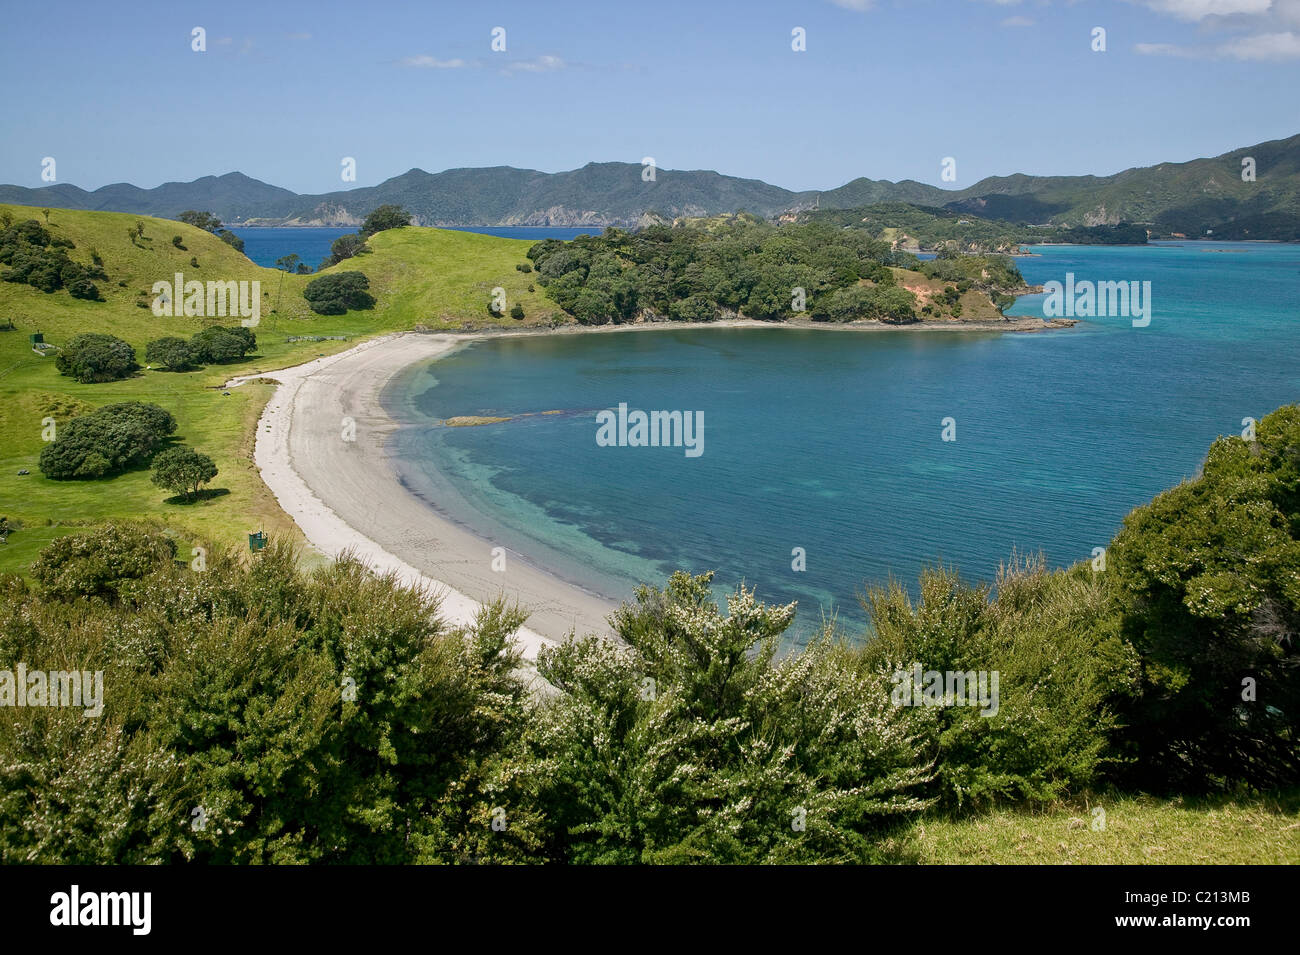 view on Bay of islands, New Zealand Stock Photo